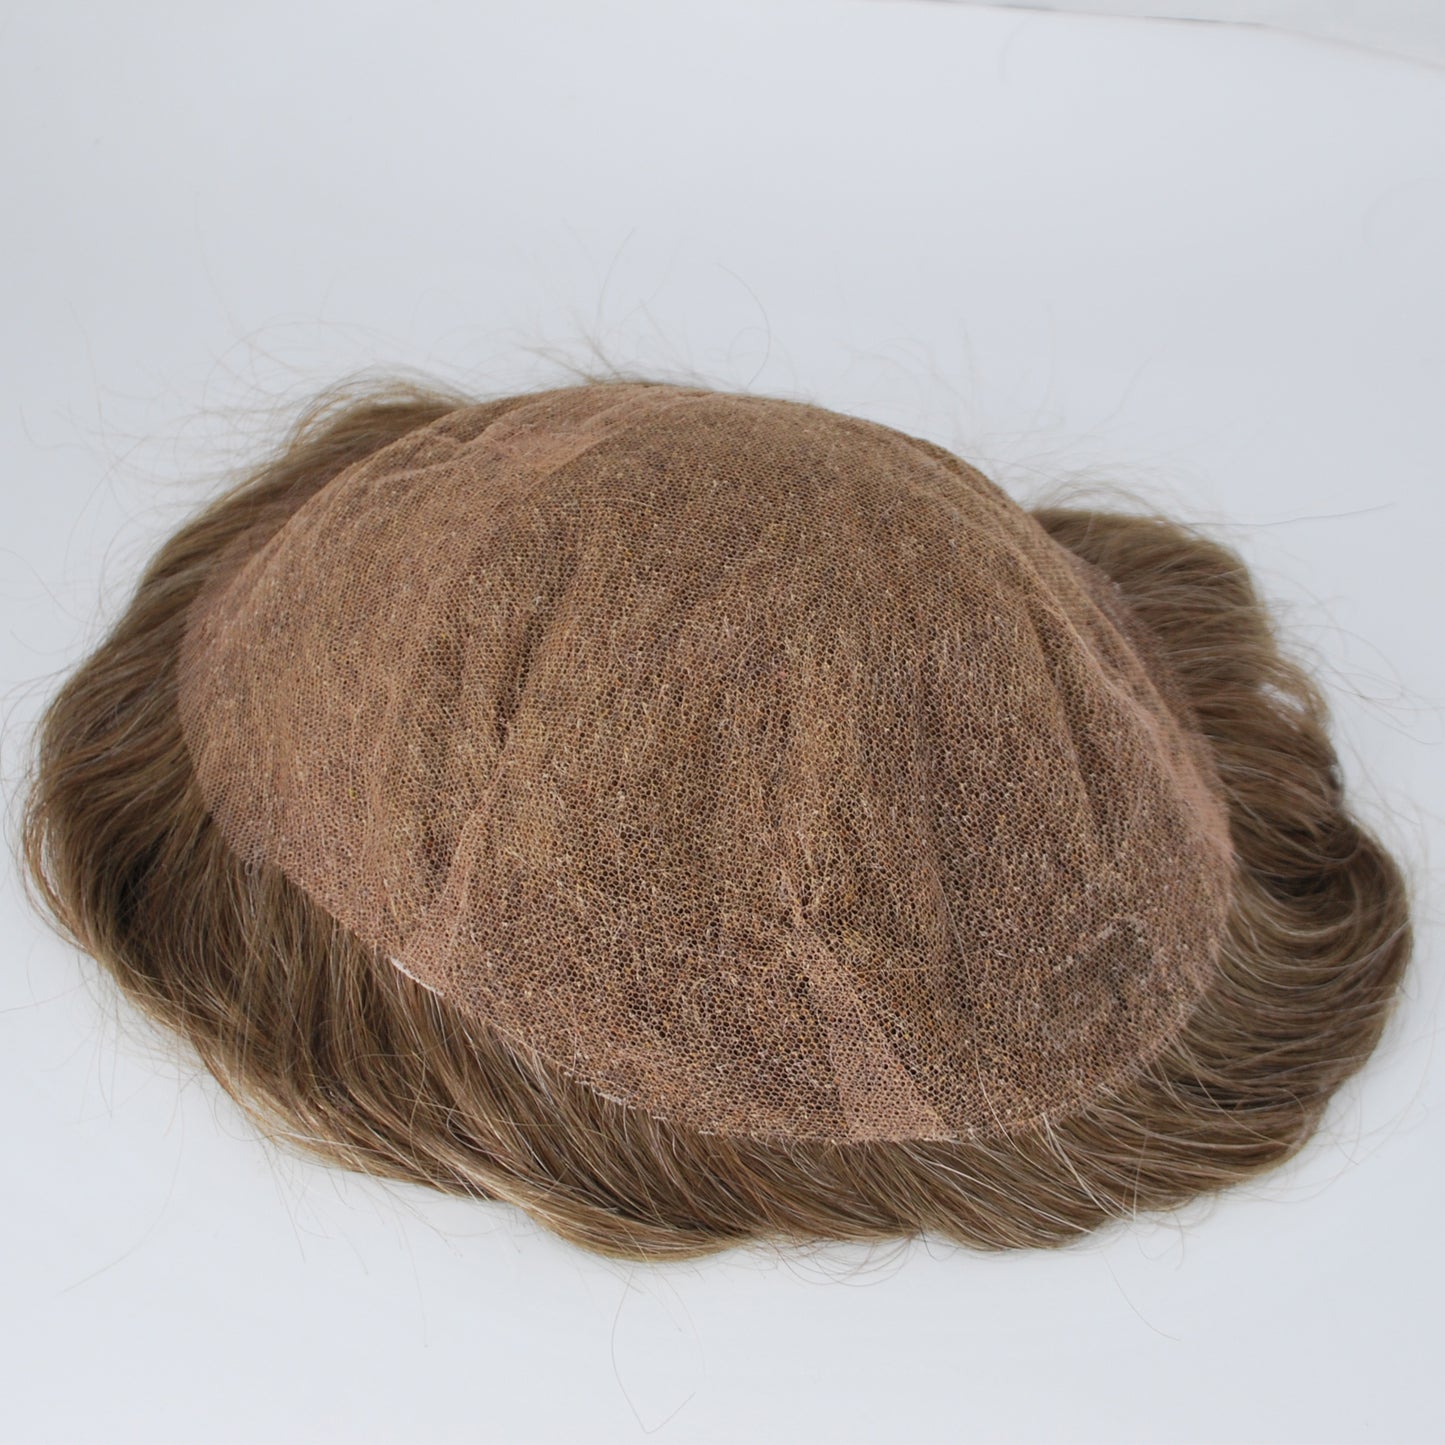 Clearance 9x7" toupee for men  #6 light brown mixed 10% grey hair french lace hair system